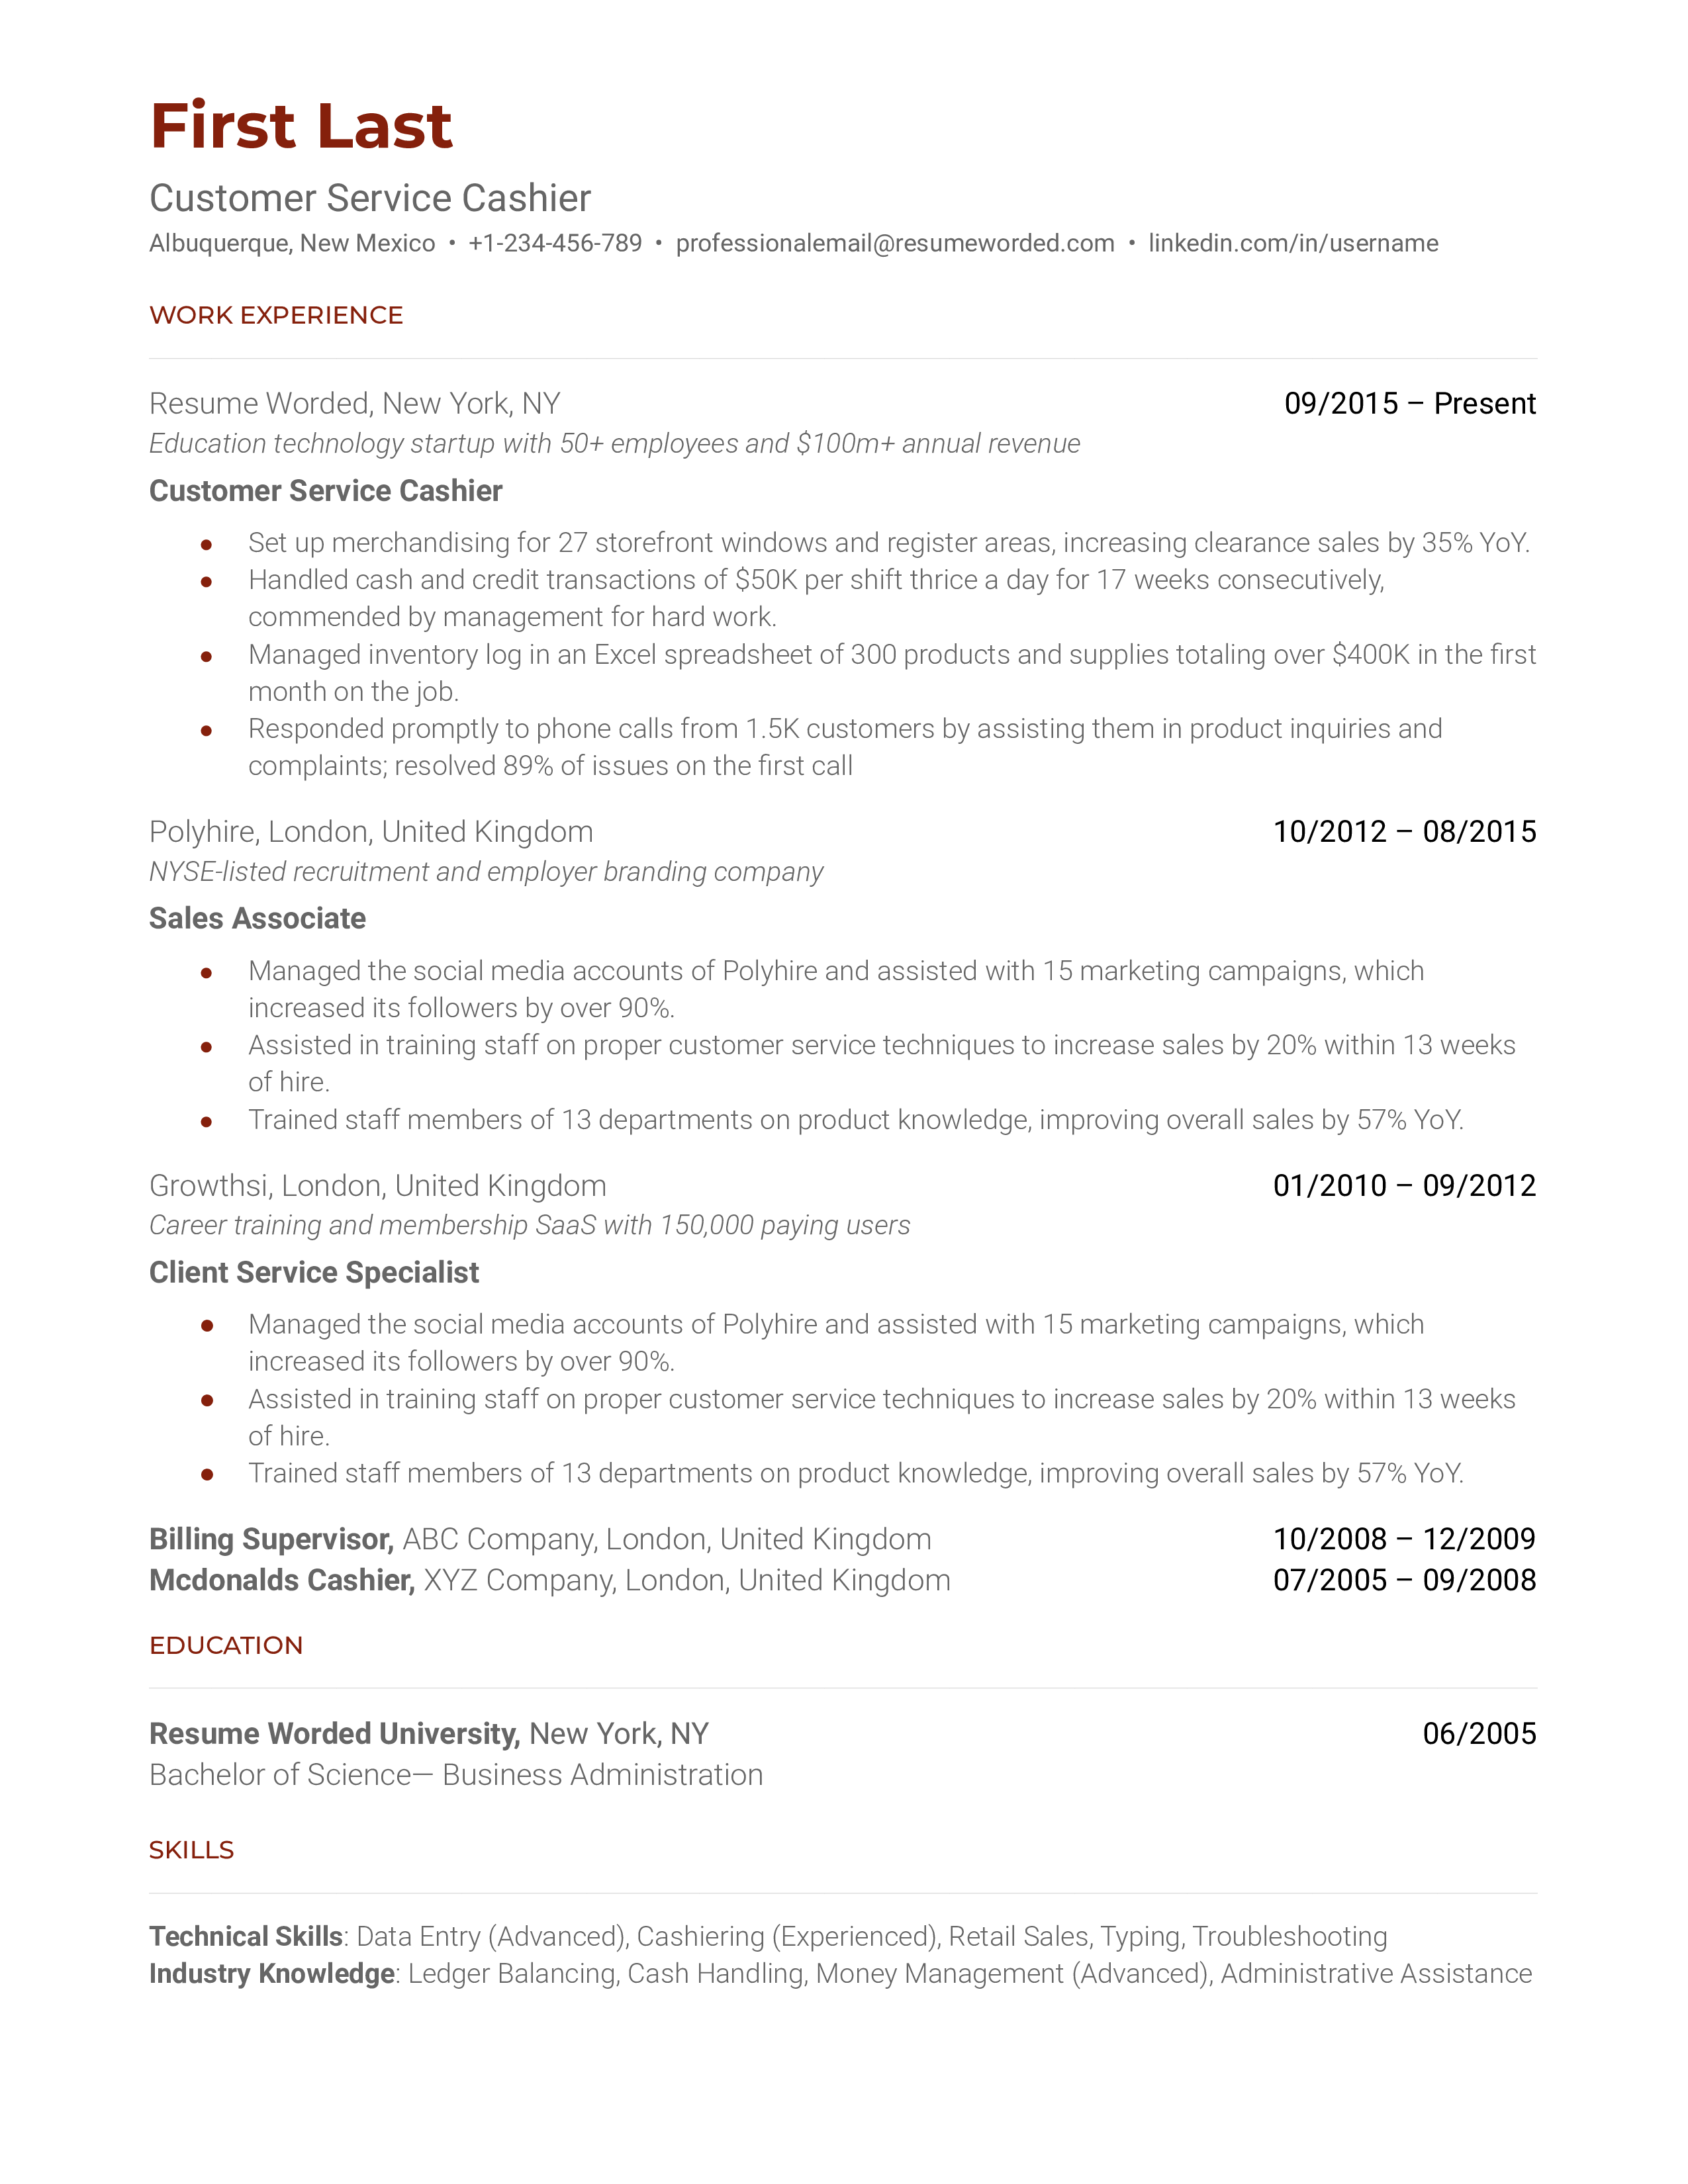 A conversational CV of a customer service cashier focusing on both soft skills and familiarity with digital payments.